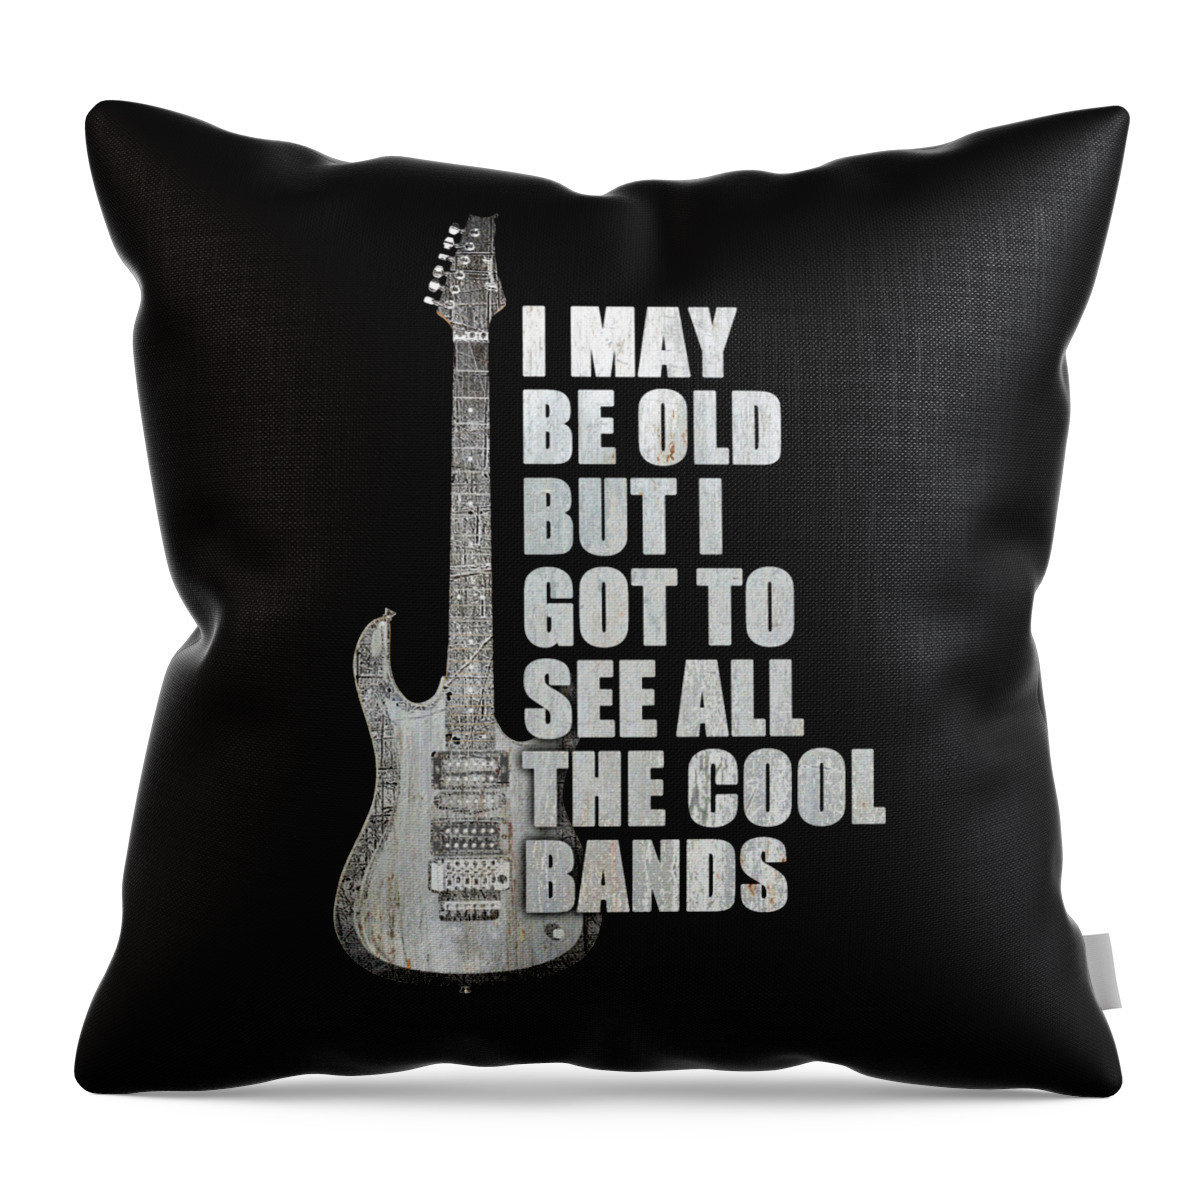 Guitar Throw Pillow featuring the painting I May Be Old But I Got To See All The Cool Bands Retro by Tony Rubino